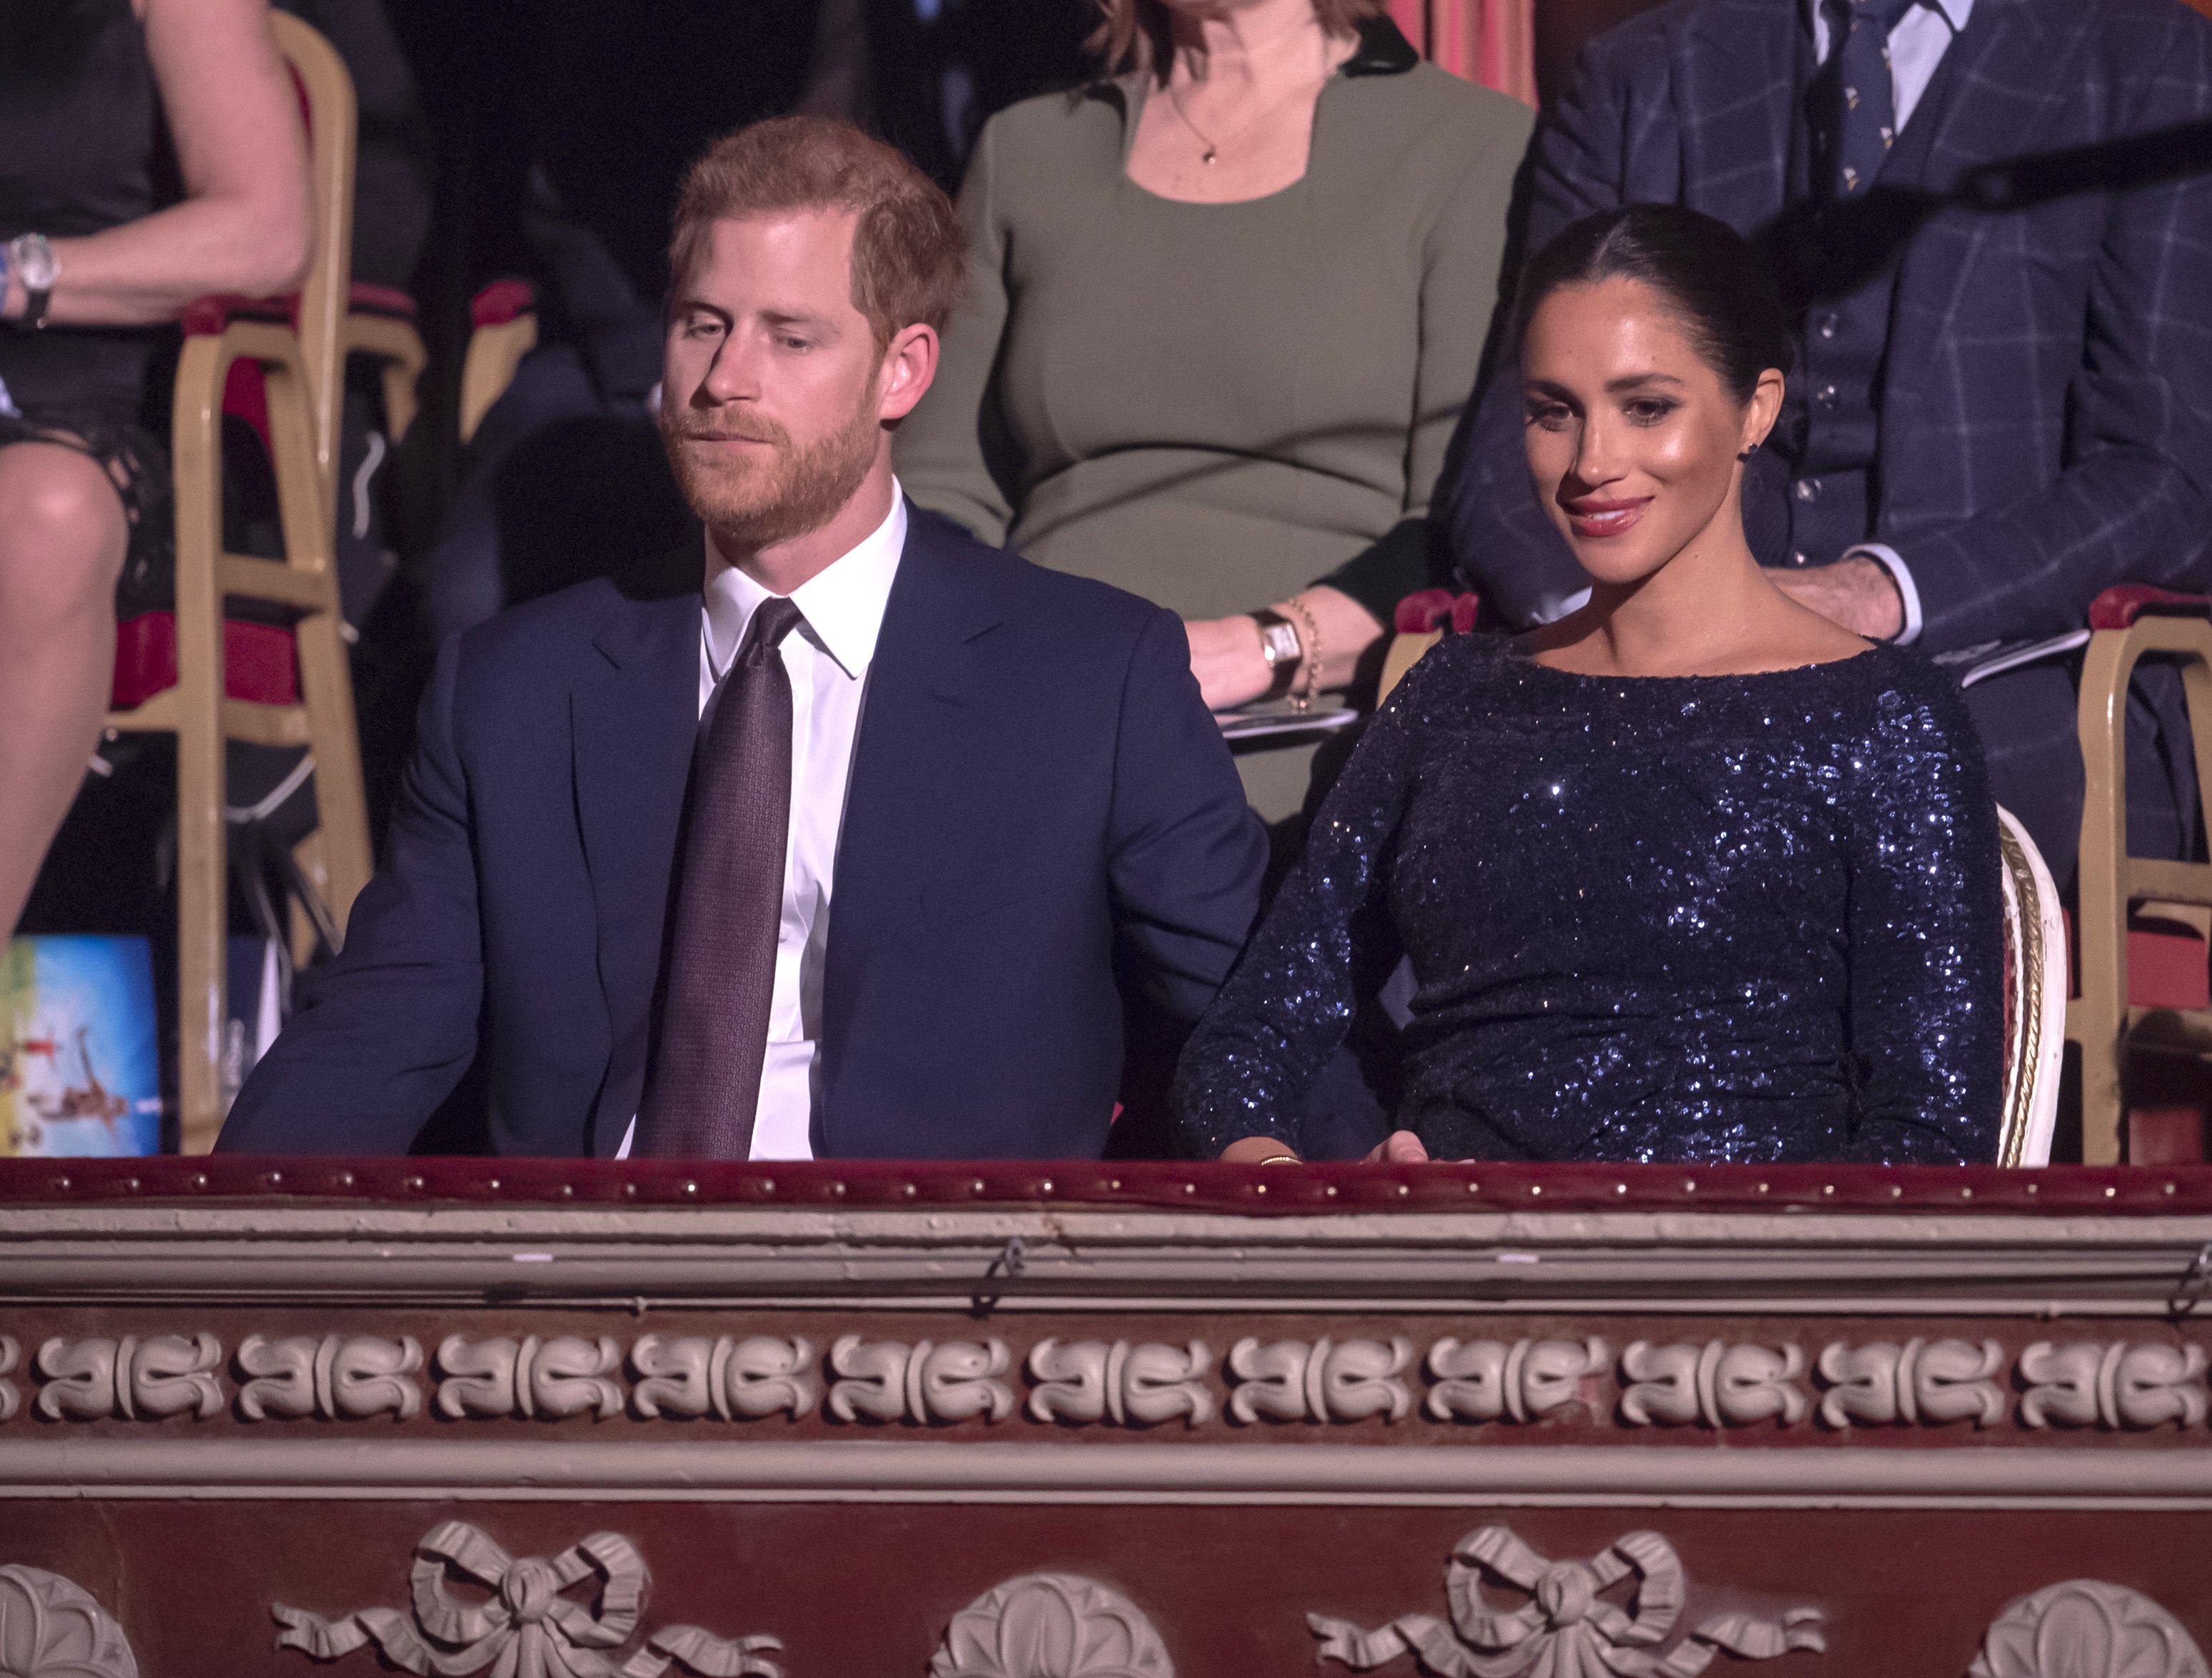 Meghan Markle and Prince Harry in London 2019. | Source: Getty Images